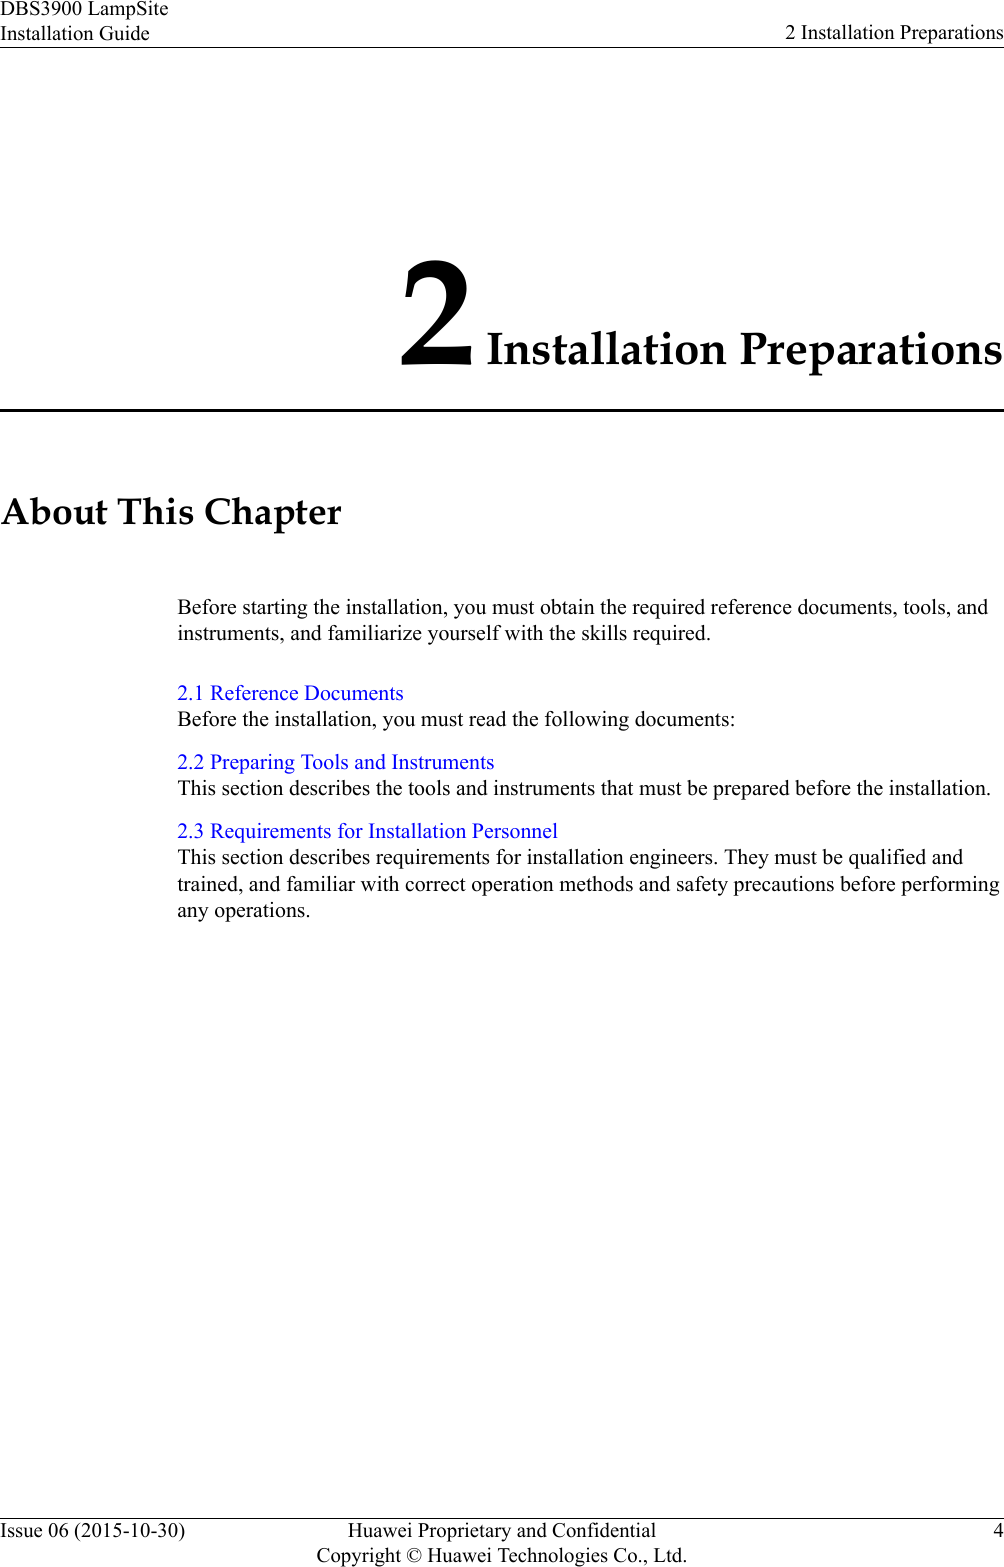 2 Installation PreparationsAbout This ChapterBefore starting the installation, you must obtain the required reference documents, tools, andinstruments, and familiarize yourself with the skills required.2.1 Reference DocumentsBefore the installation, you must read the following documents:2.2 Preparing Tools and InstrumentsThis section describes the tools and instruments that must be prepared before the installation.2.3 Requirements for Installation PersonnelThis section describes requirements for installation engineers. They must be qualified andtrained, and familiar with correct operation methods and safety precautions before performingany operations.DBS3900 LampSiteInstallation Guide 2 Installation PreparationsIssue 06 (2015-10-30) Huawei Proprietary and ConfidentialCopyright © Huawei Technologies Co., Ltd.4